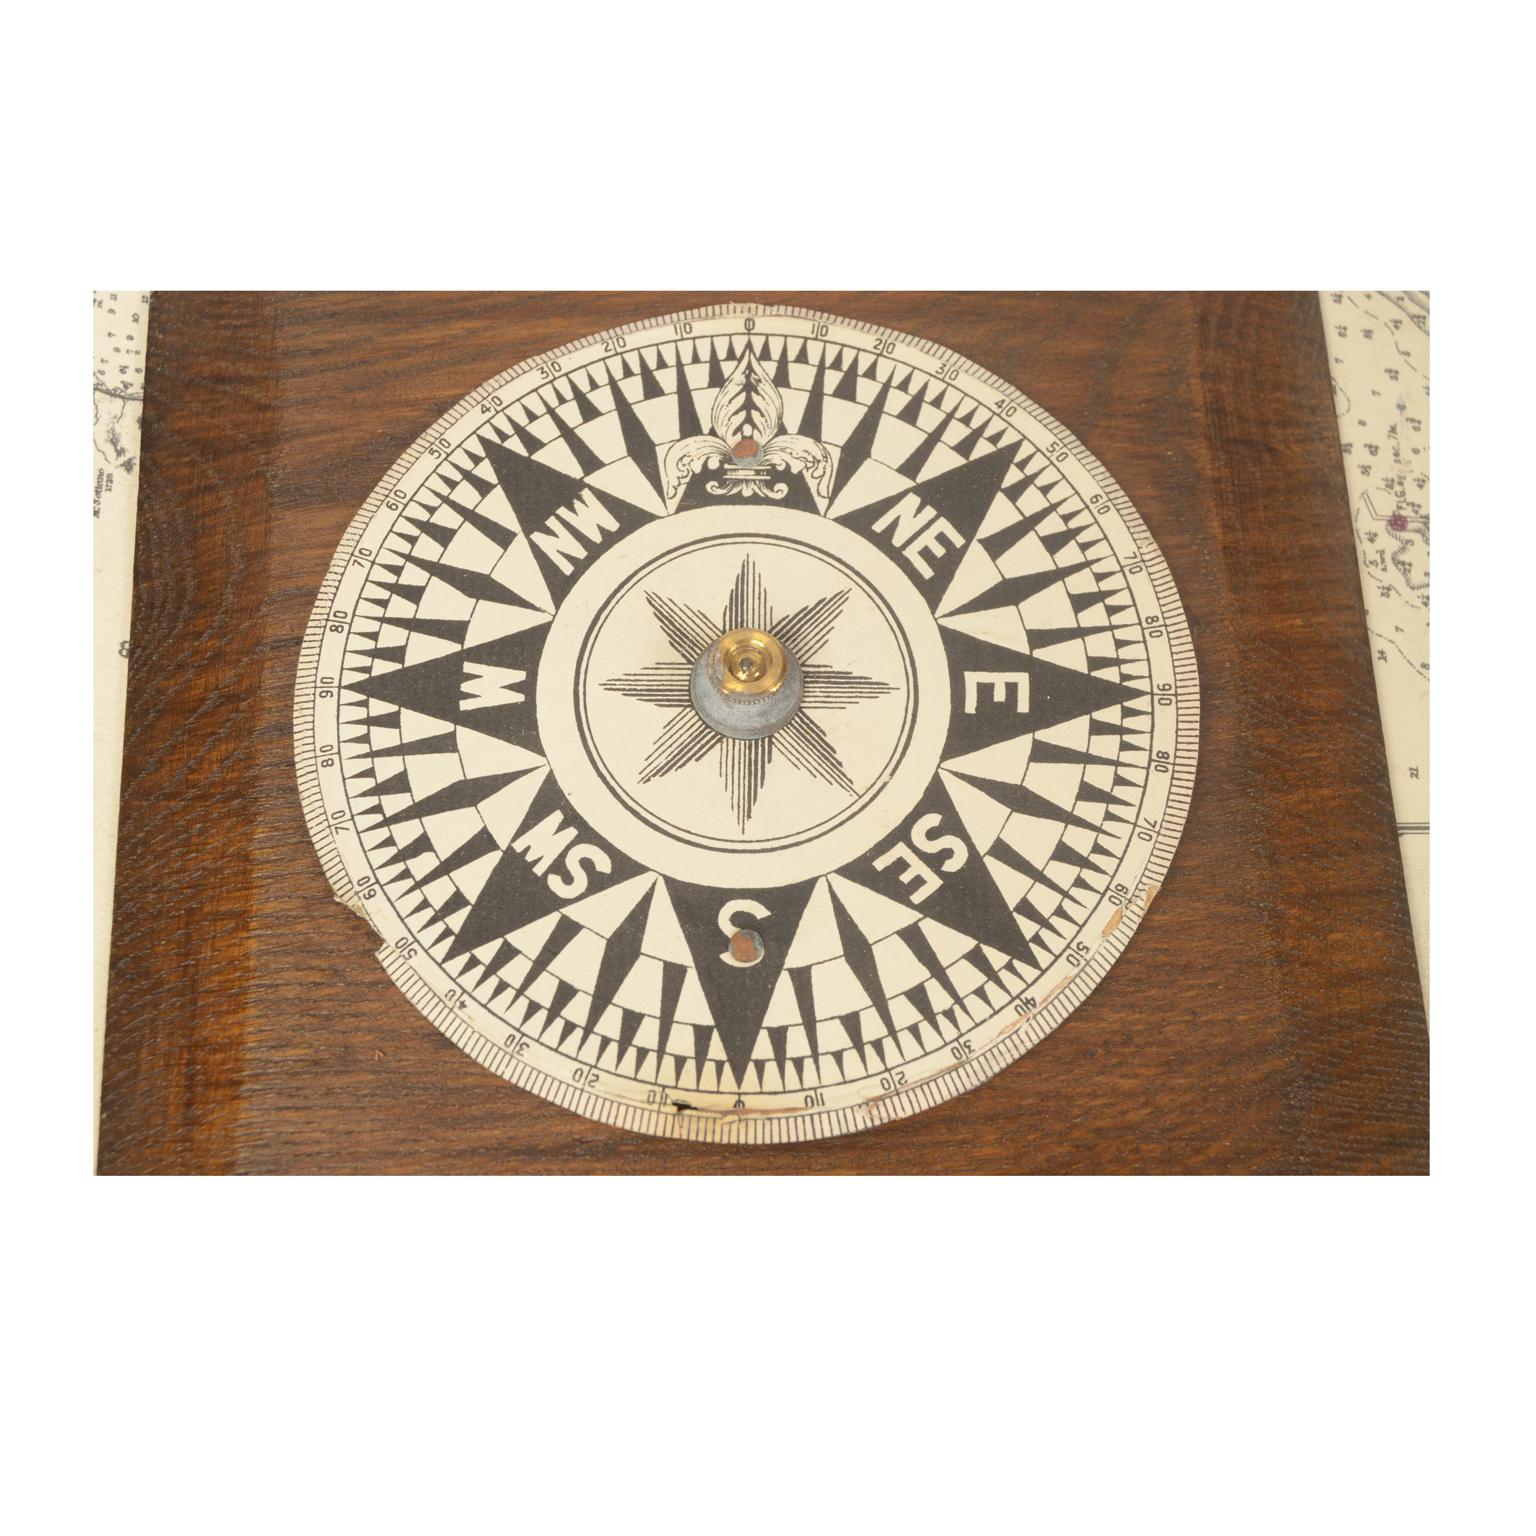 Mid-19th Century 1860 English Antique Brass Nautical Magnetic Dry Compass in Original Wooden Box 